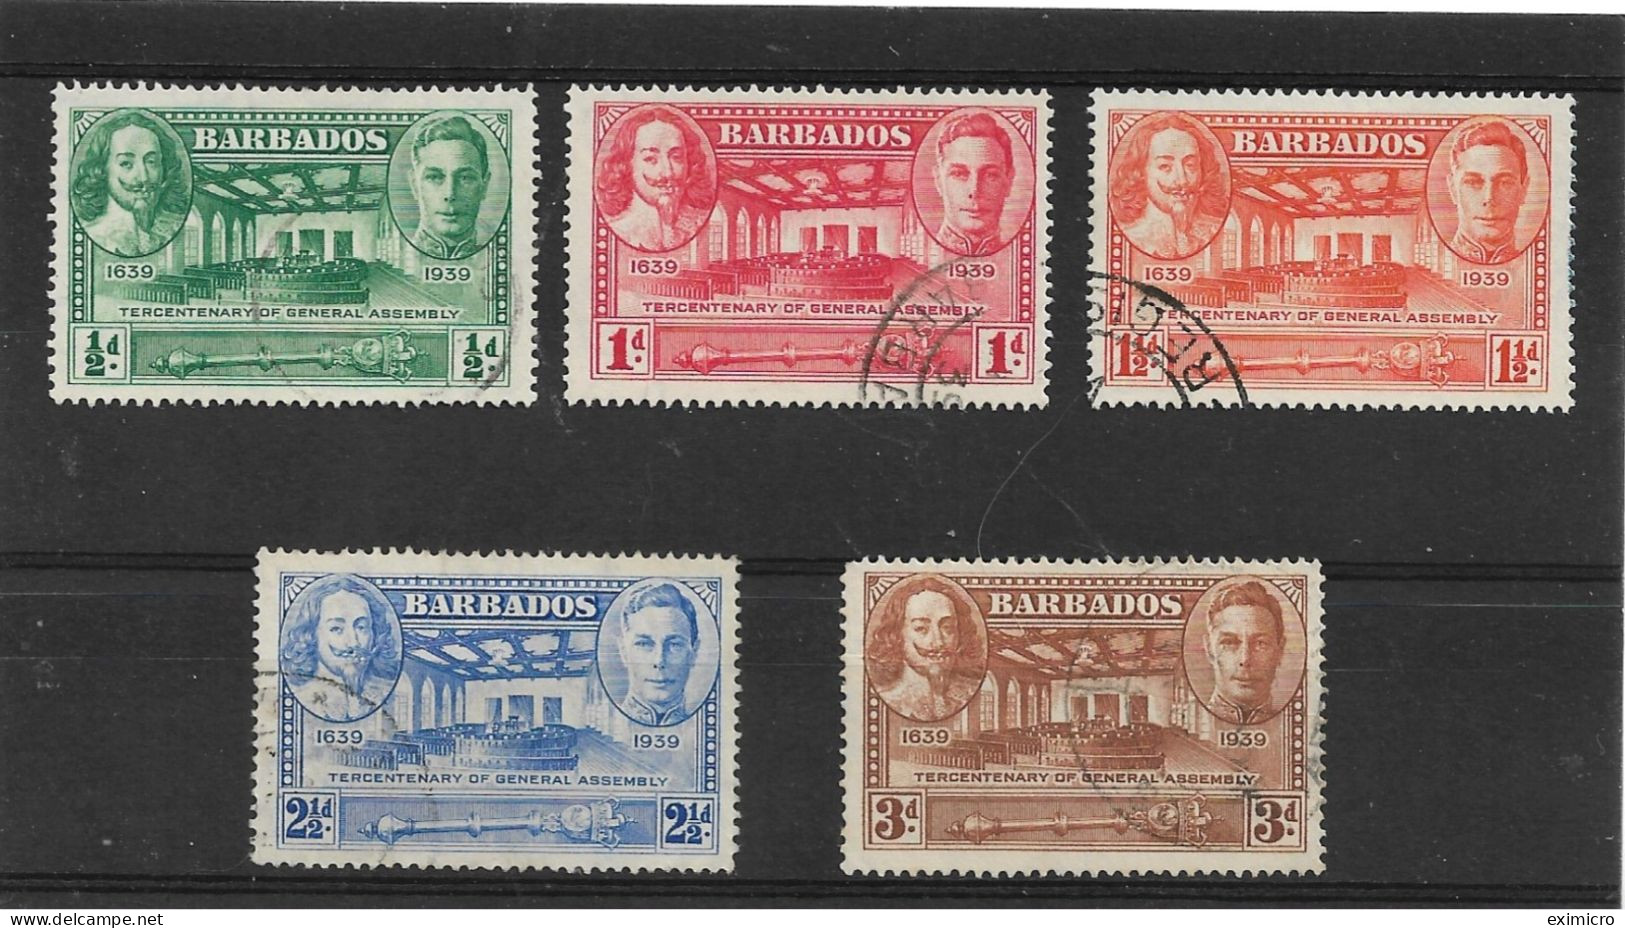 BARBADOS 1939 TERCENTENARY OF GENERAL ASSEMBLY SET SG 257/261 FINE USED Cat £15 - Barbados (...-1966)